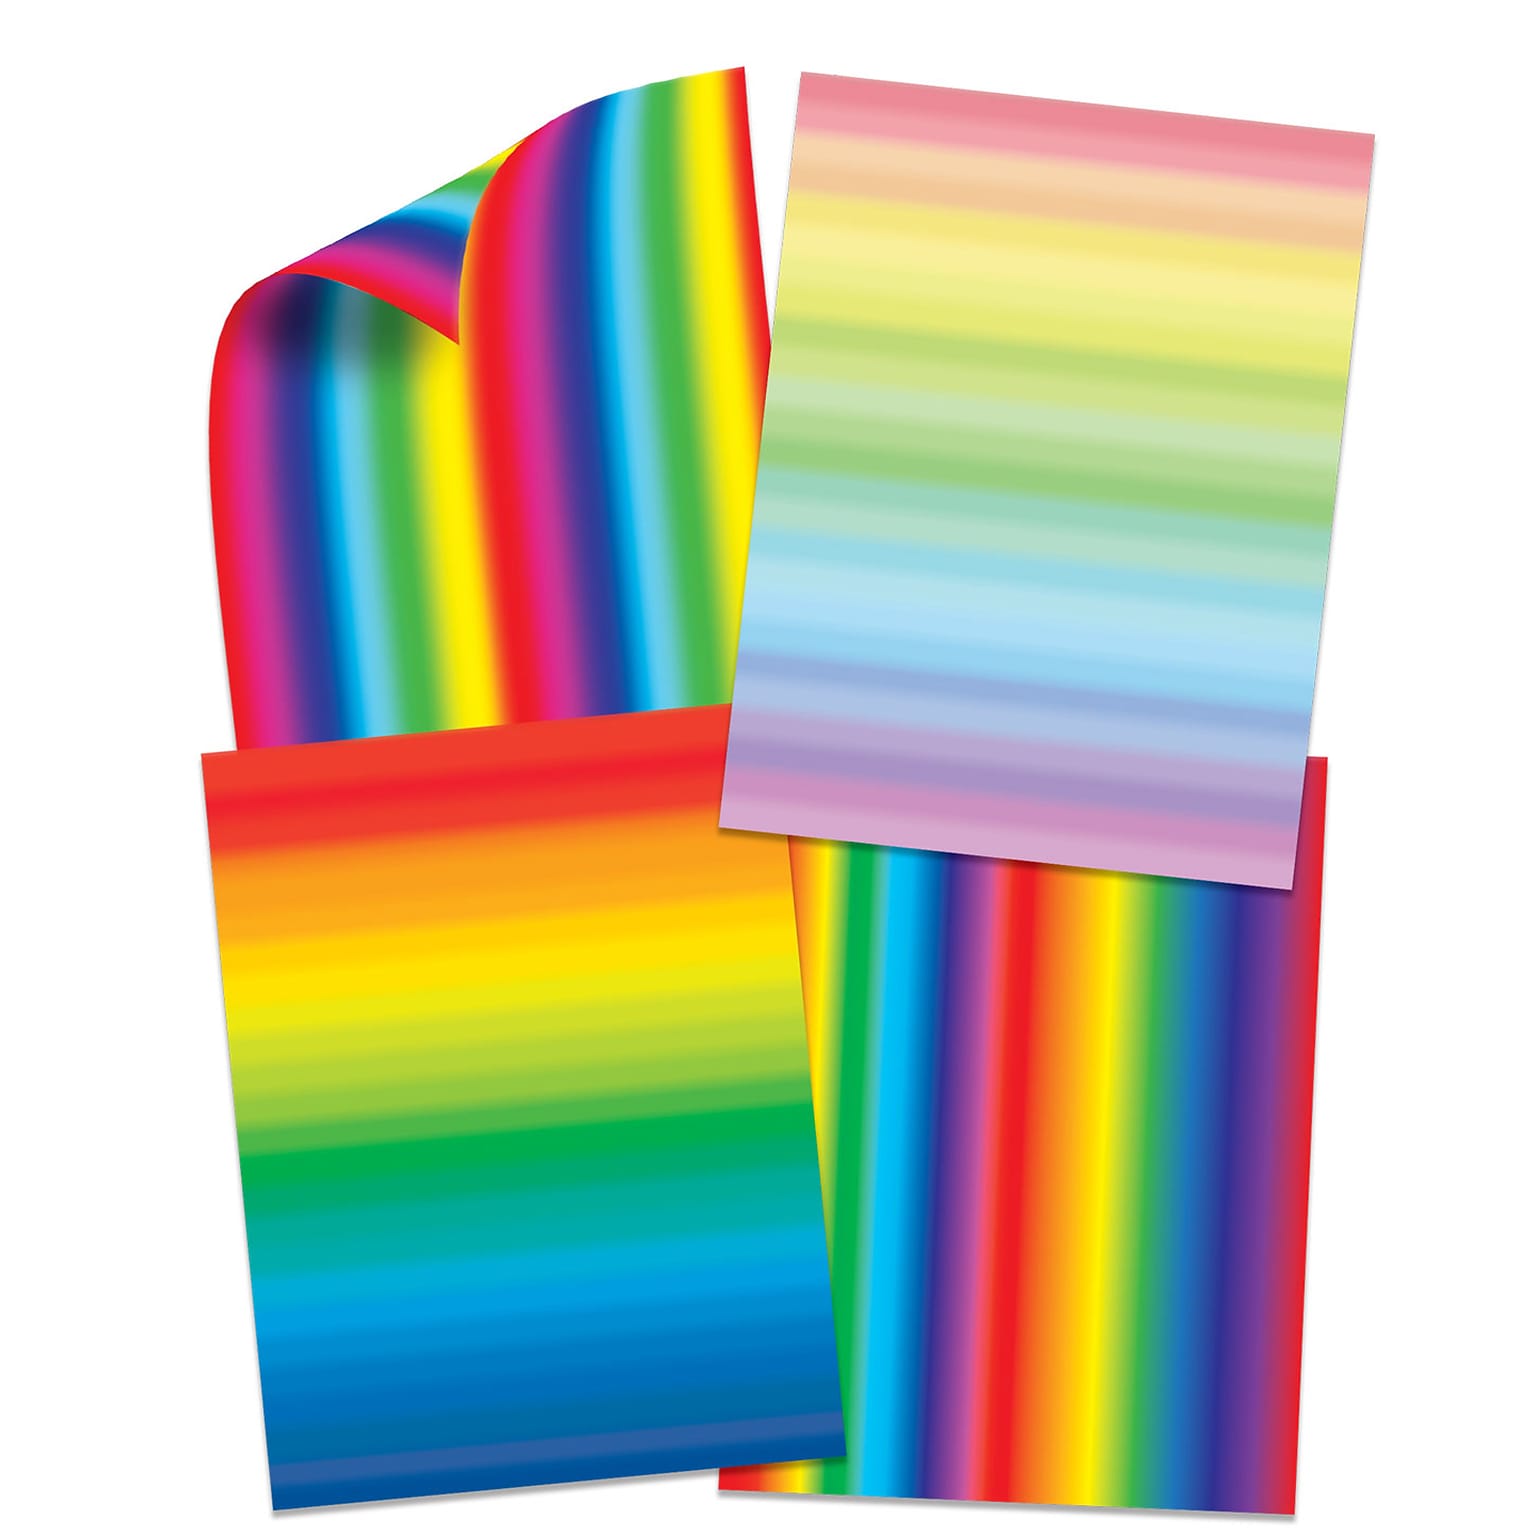 Roylco Double-Sided Rainbow Paper, 96 Sheets/Pack (R-15421)